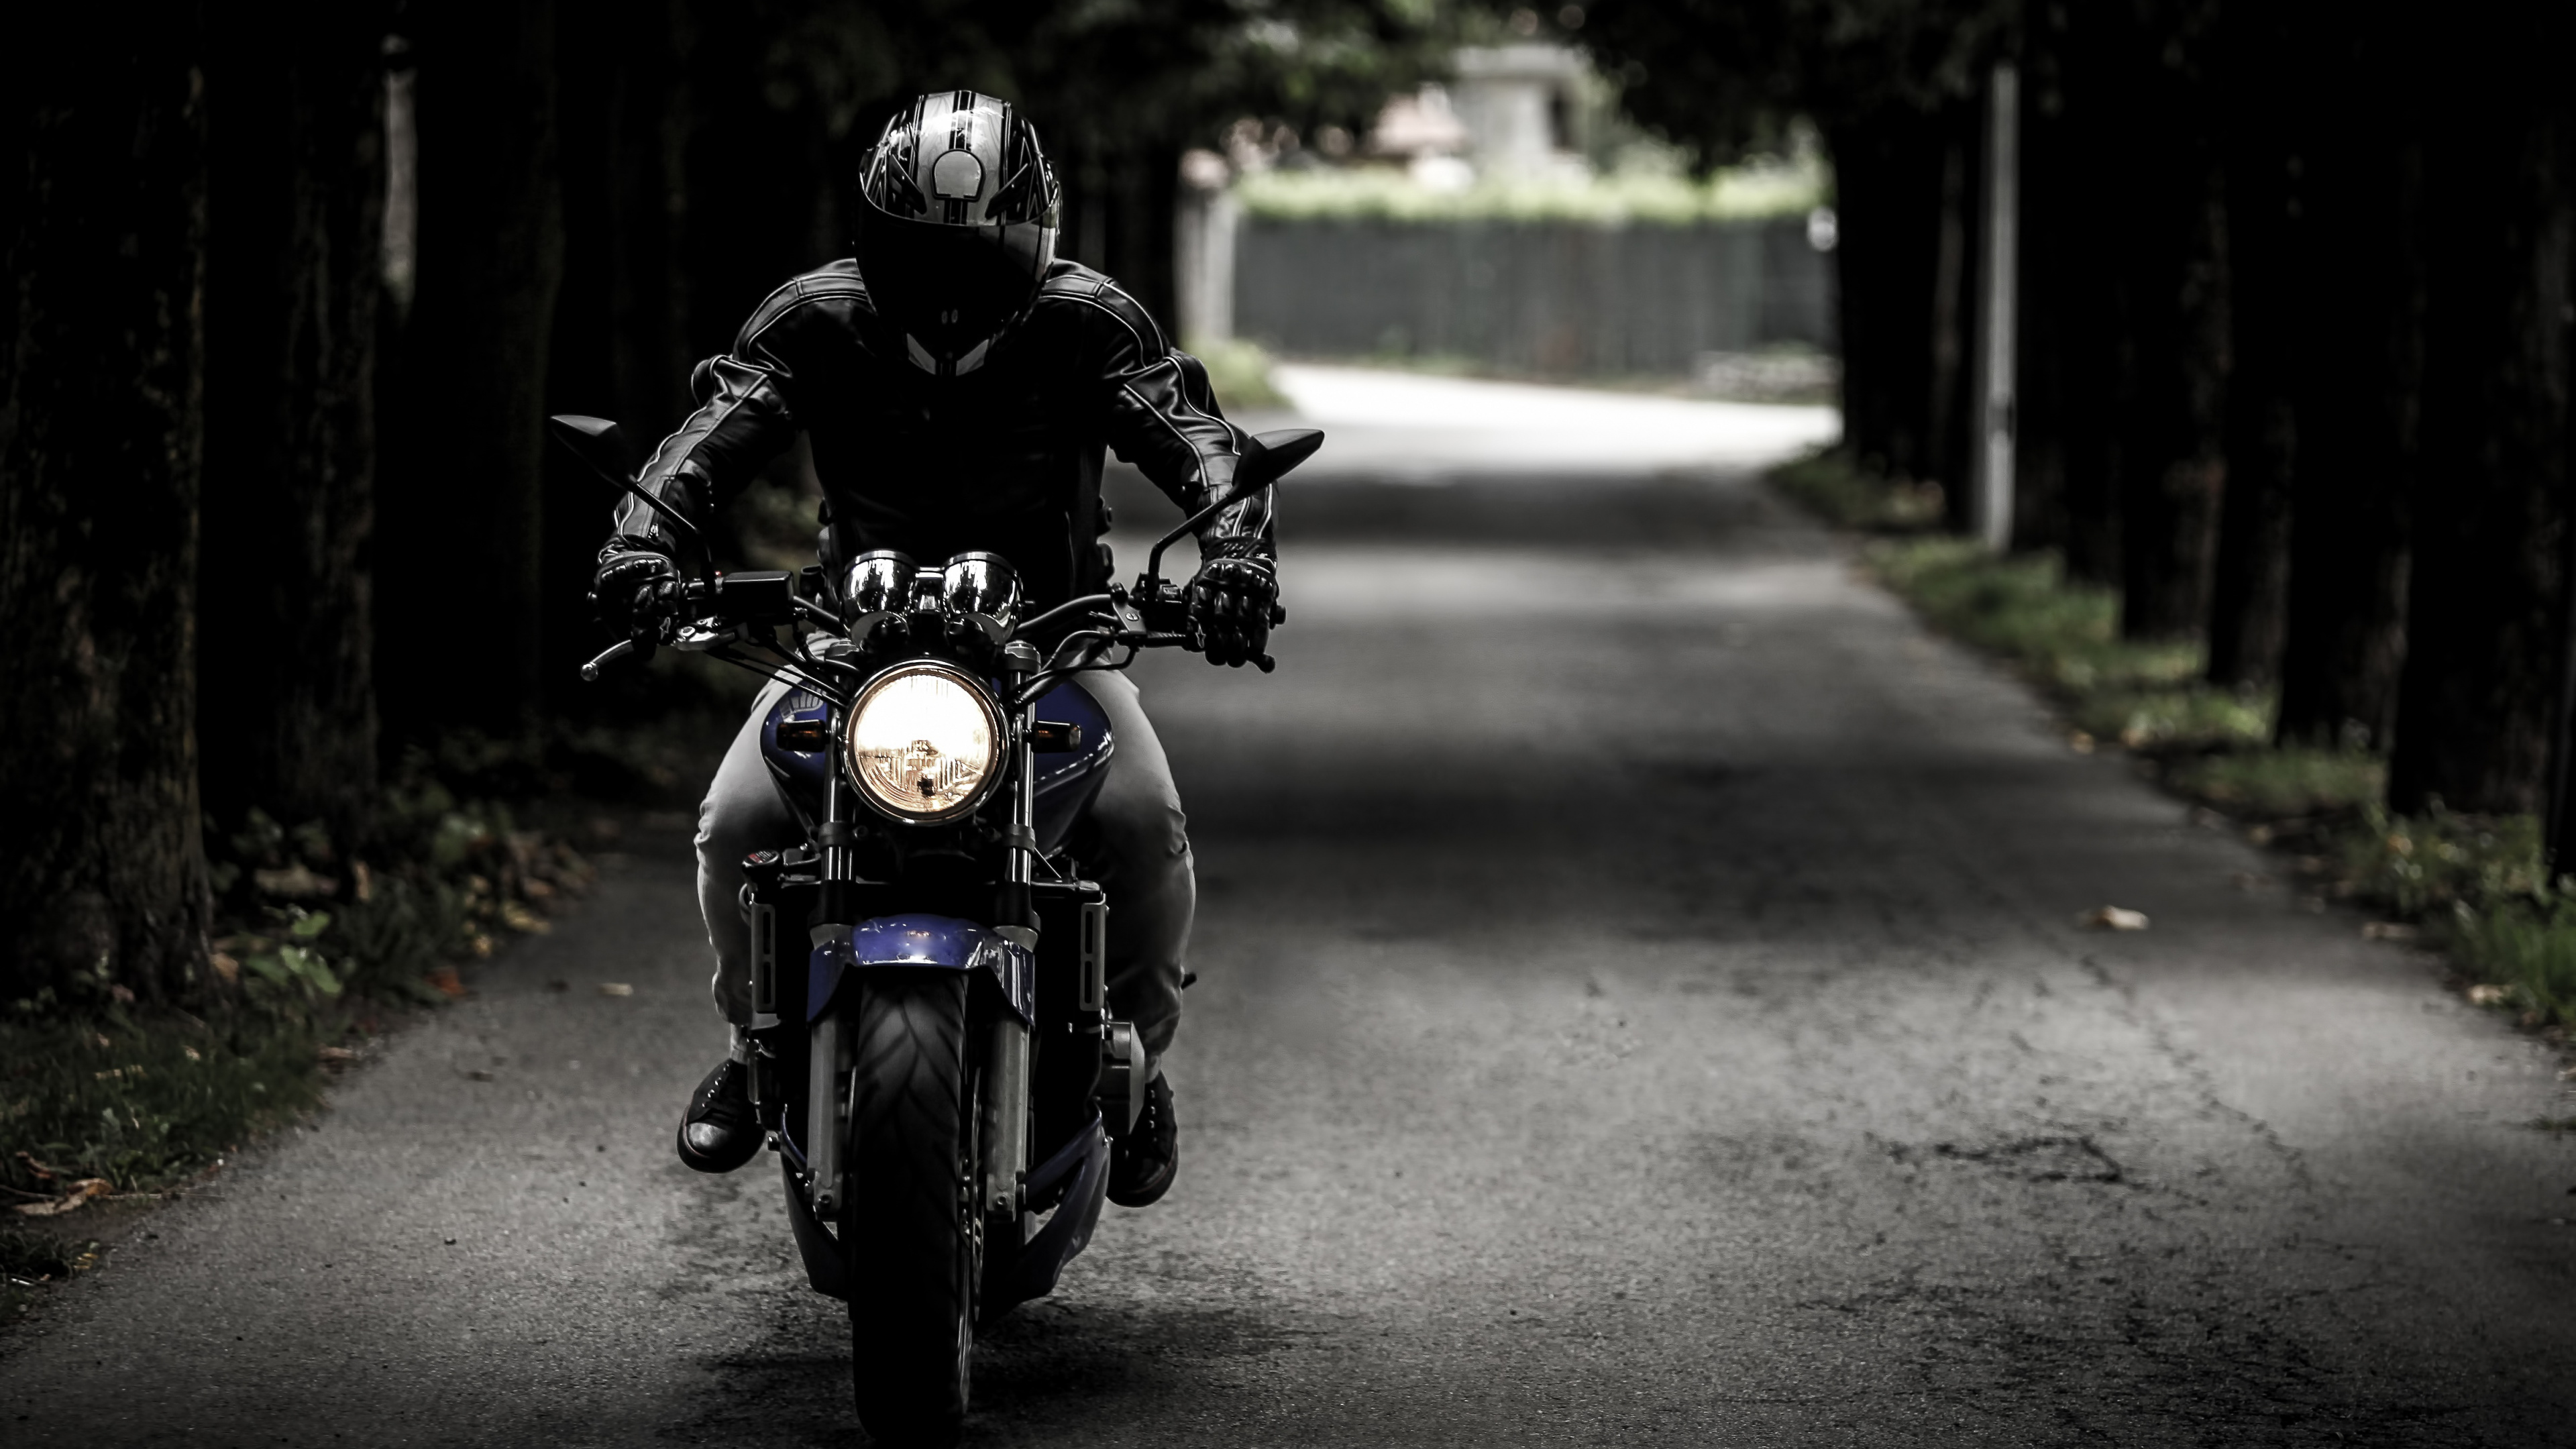 Man in Black Helmet Riding Motorcycle on Road During Daytime. Wallpaper in 3840x2160 Resolution